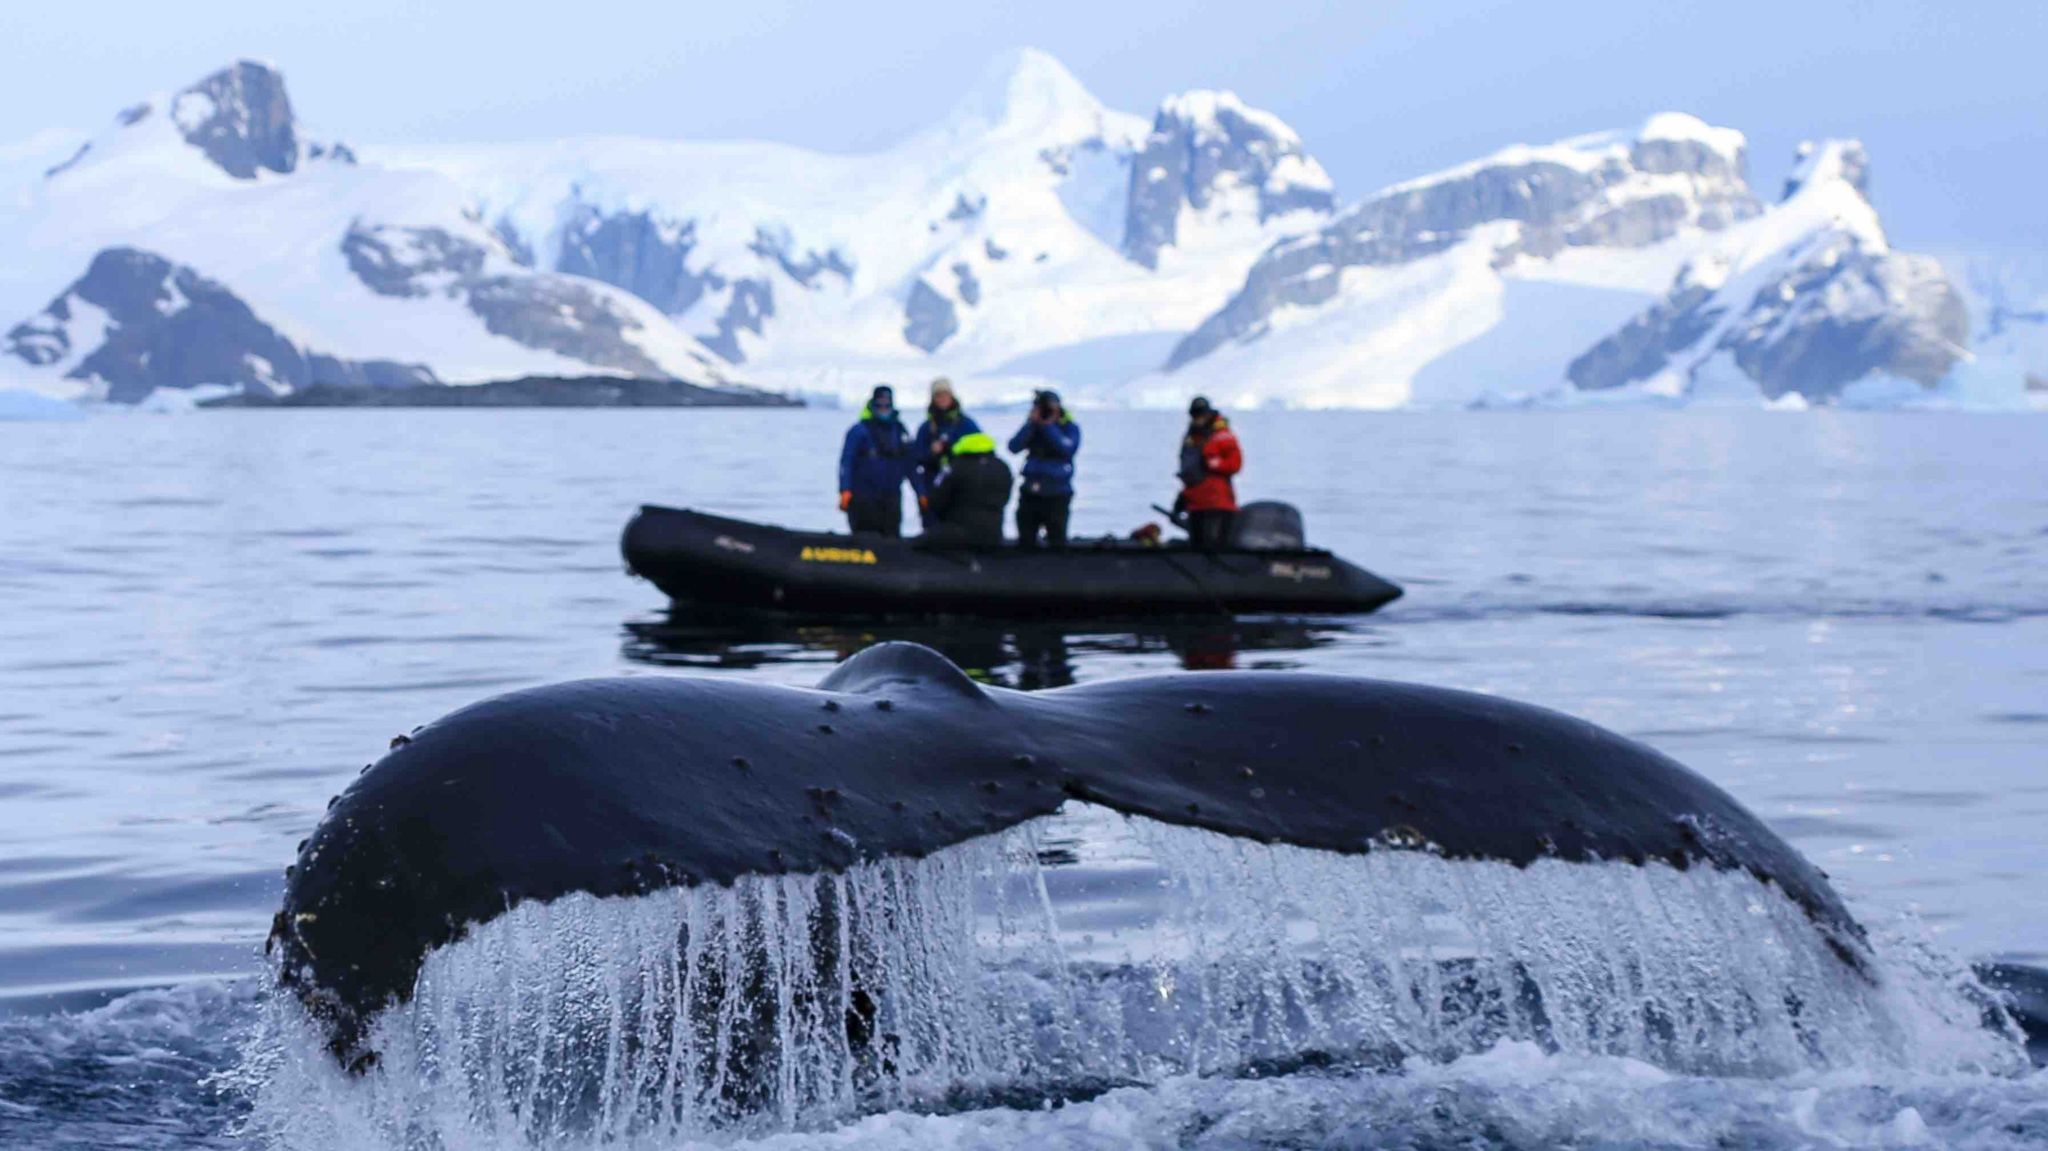 A whale's tail rising about the water in front of scientists in a dinghy. In the background snowcapped mountains rise from the ocean.